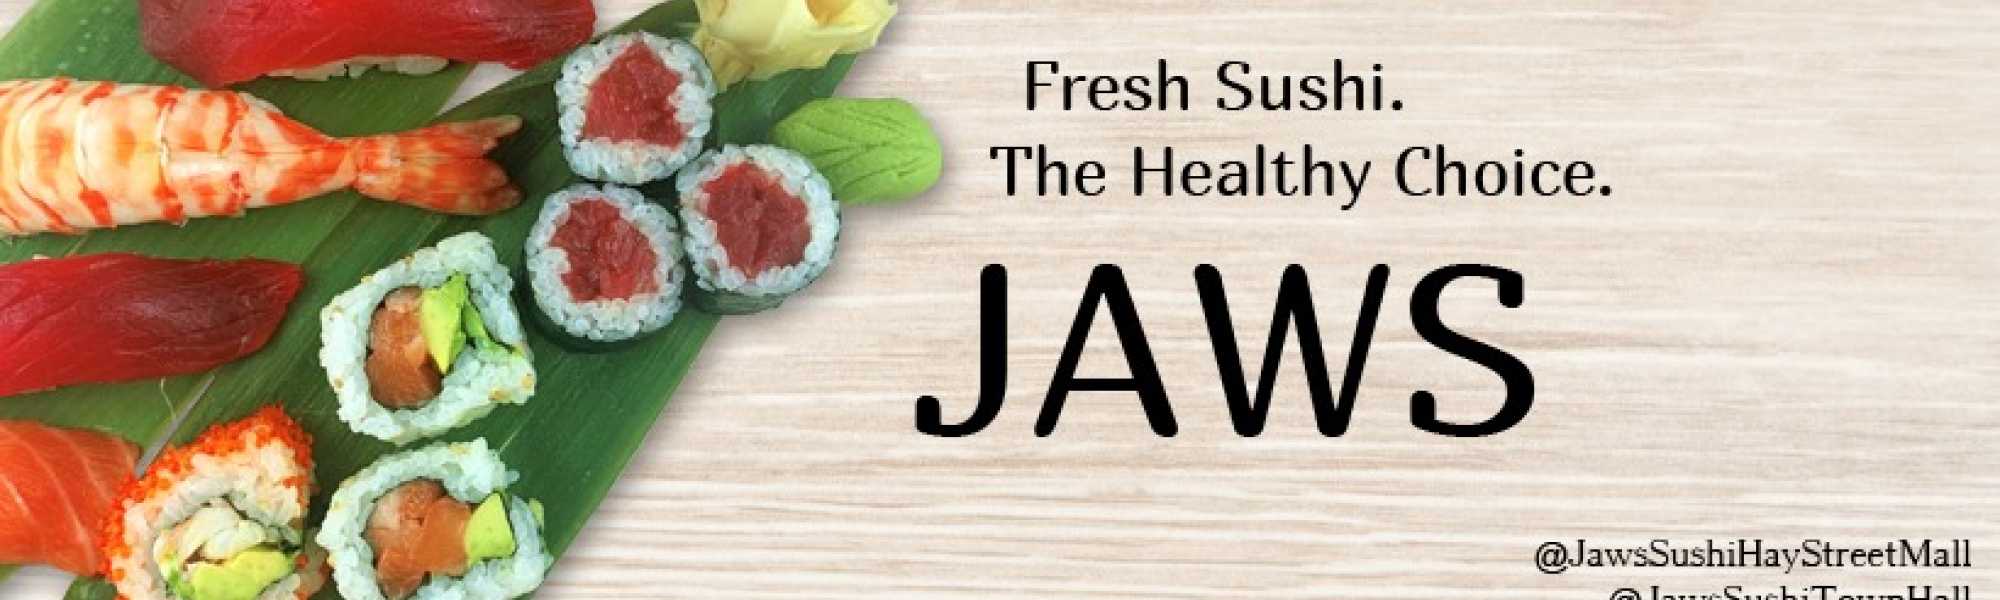 Jaws Sushi Hay St Mall